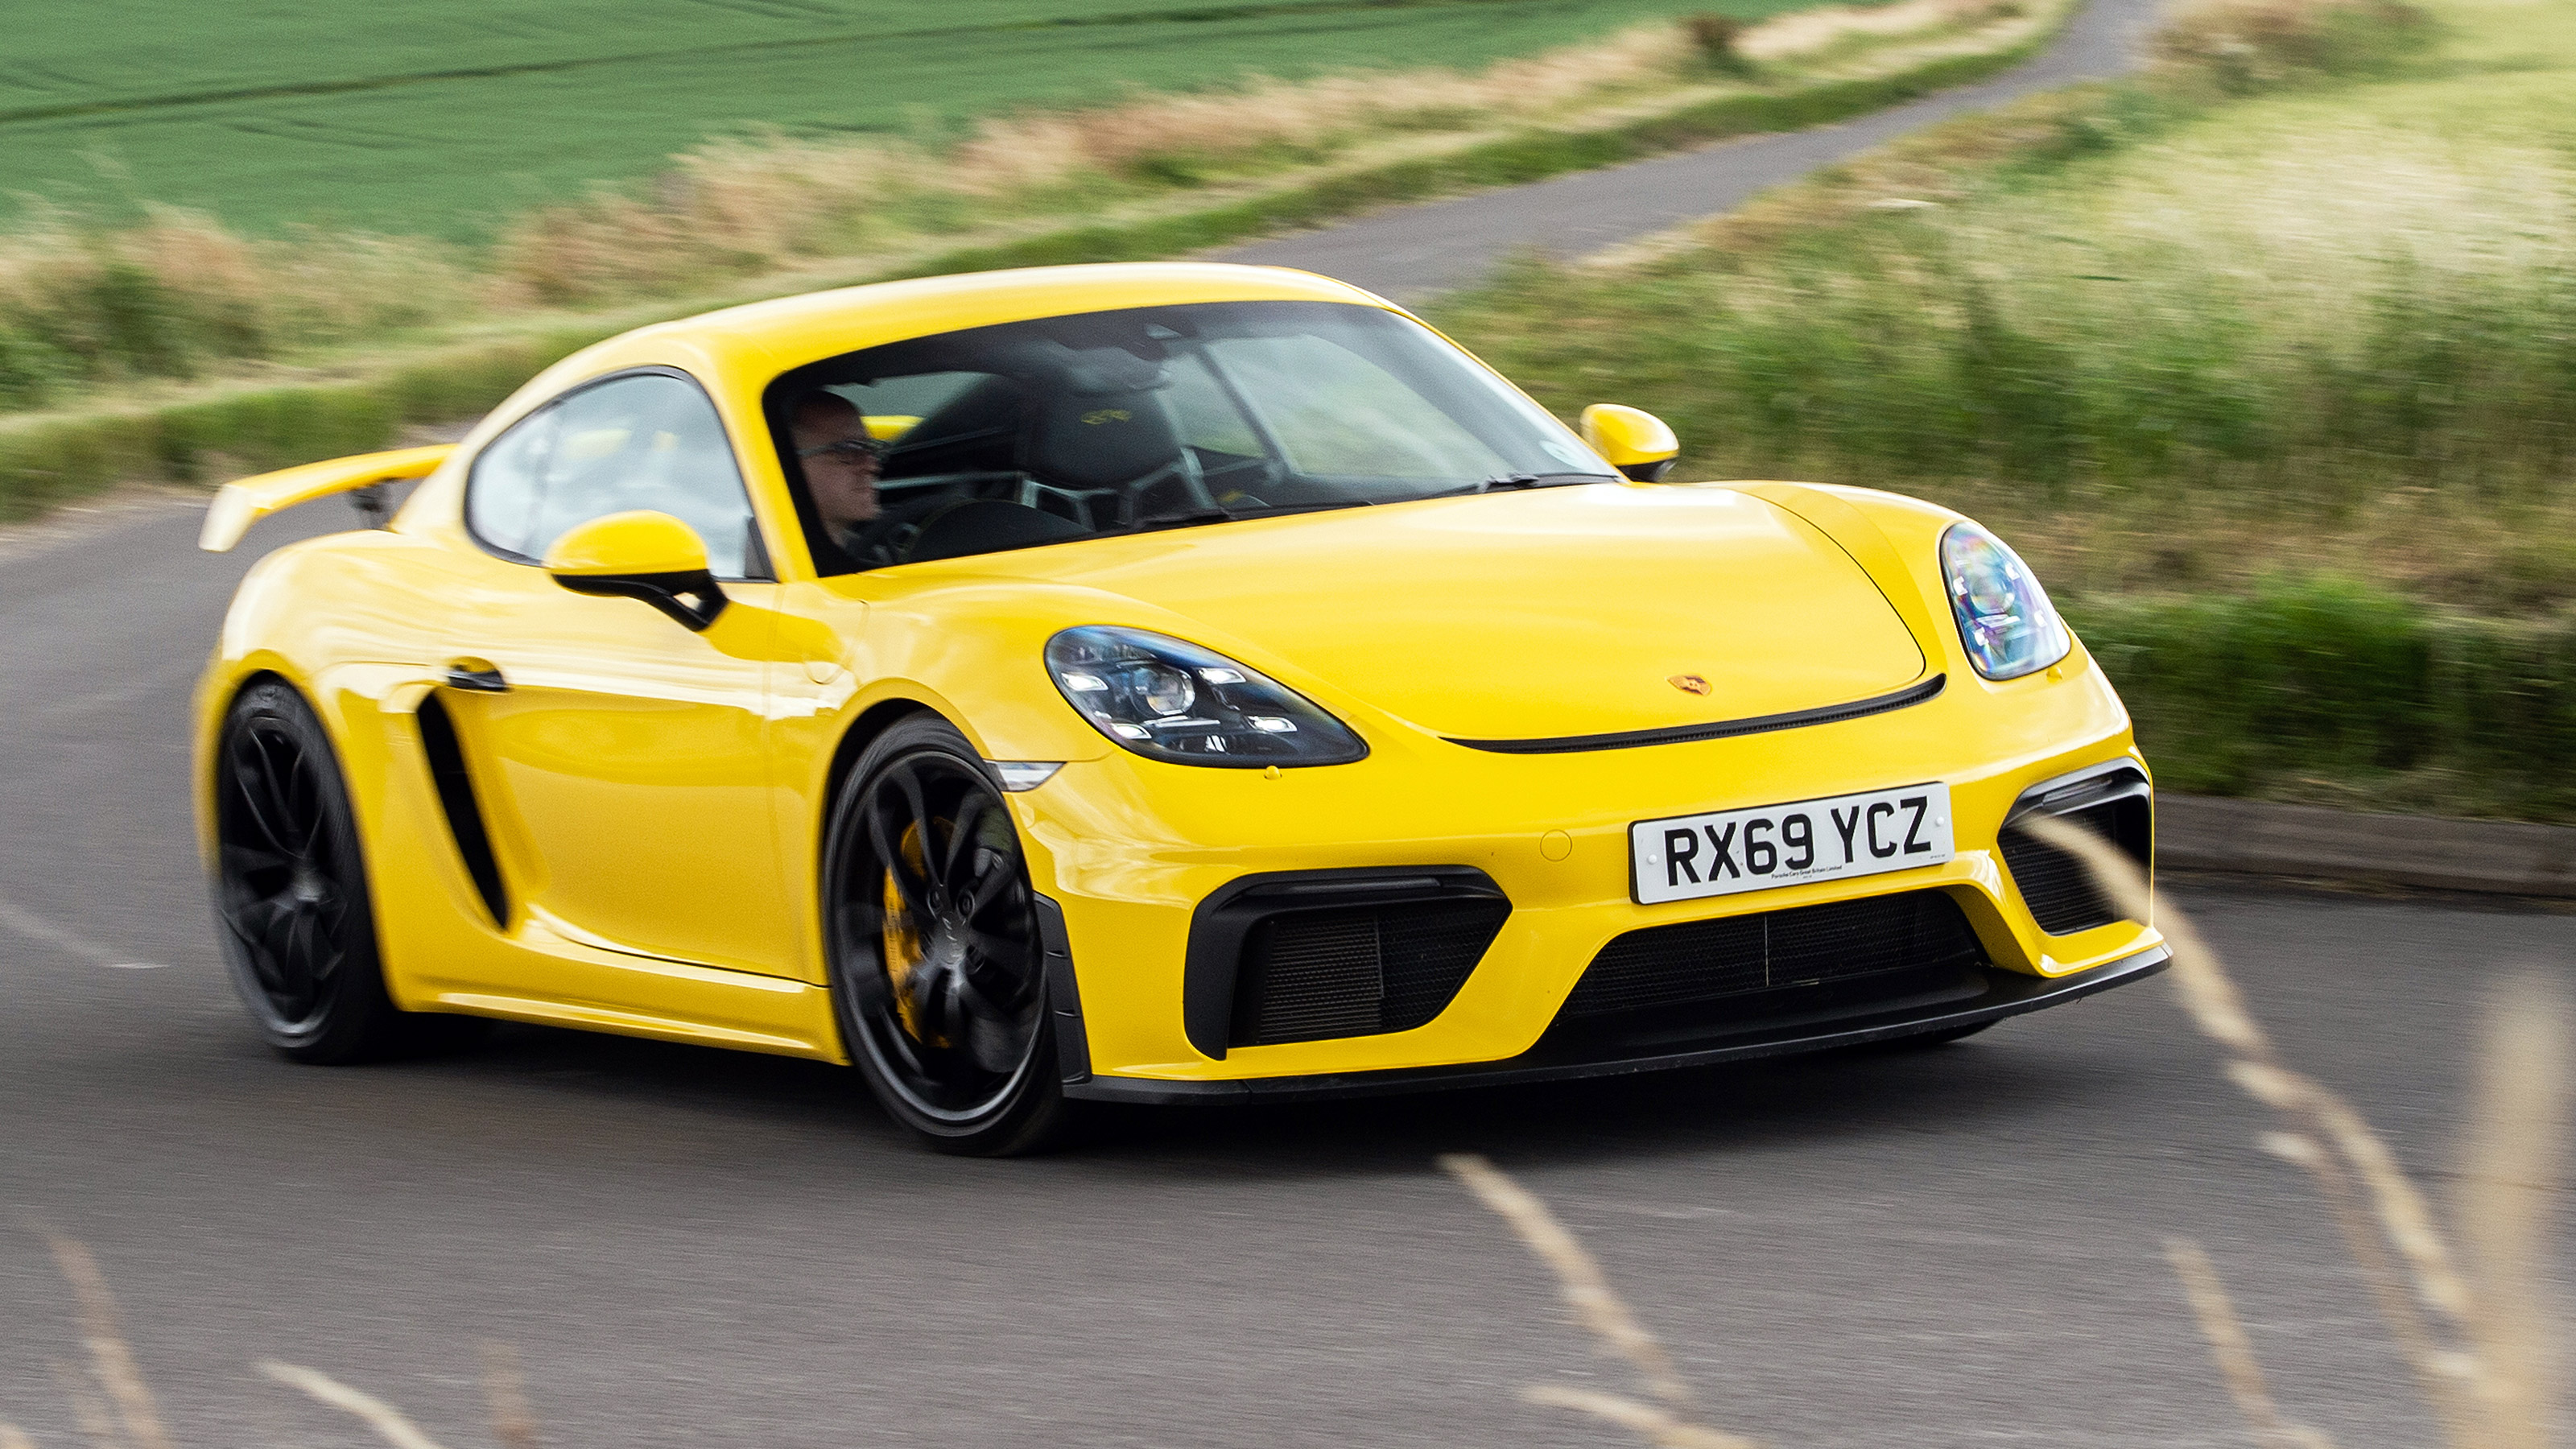 New 2018 Porsche 718 Cayman GT4 - everything you need to know